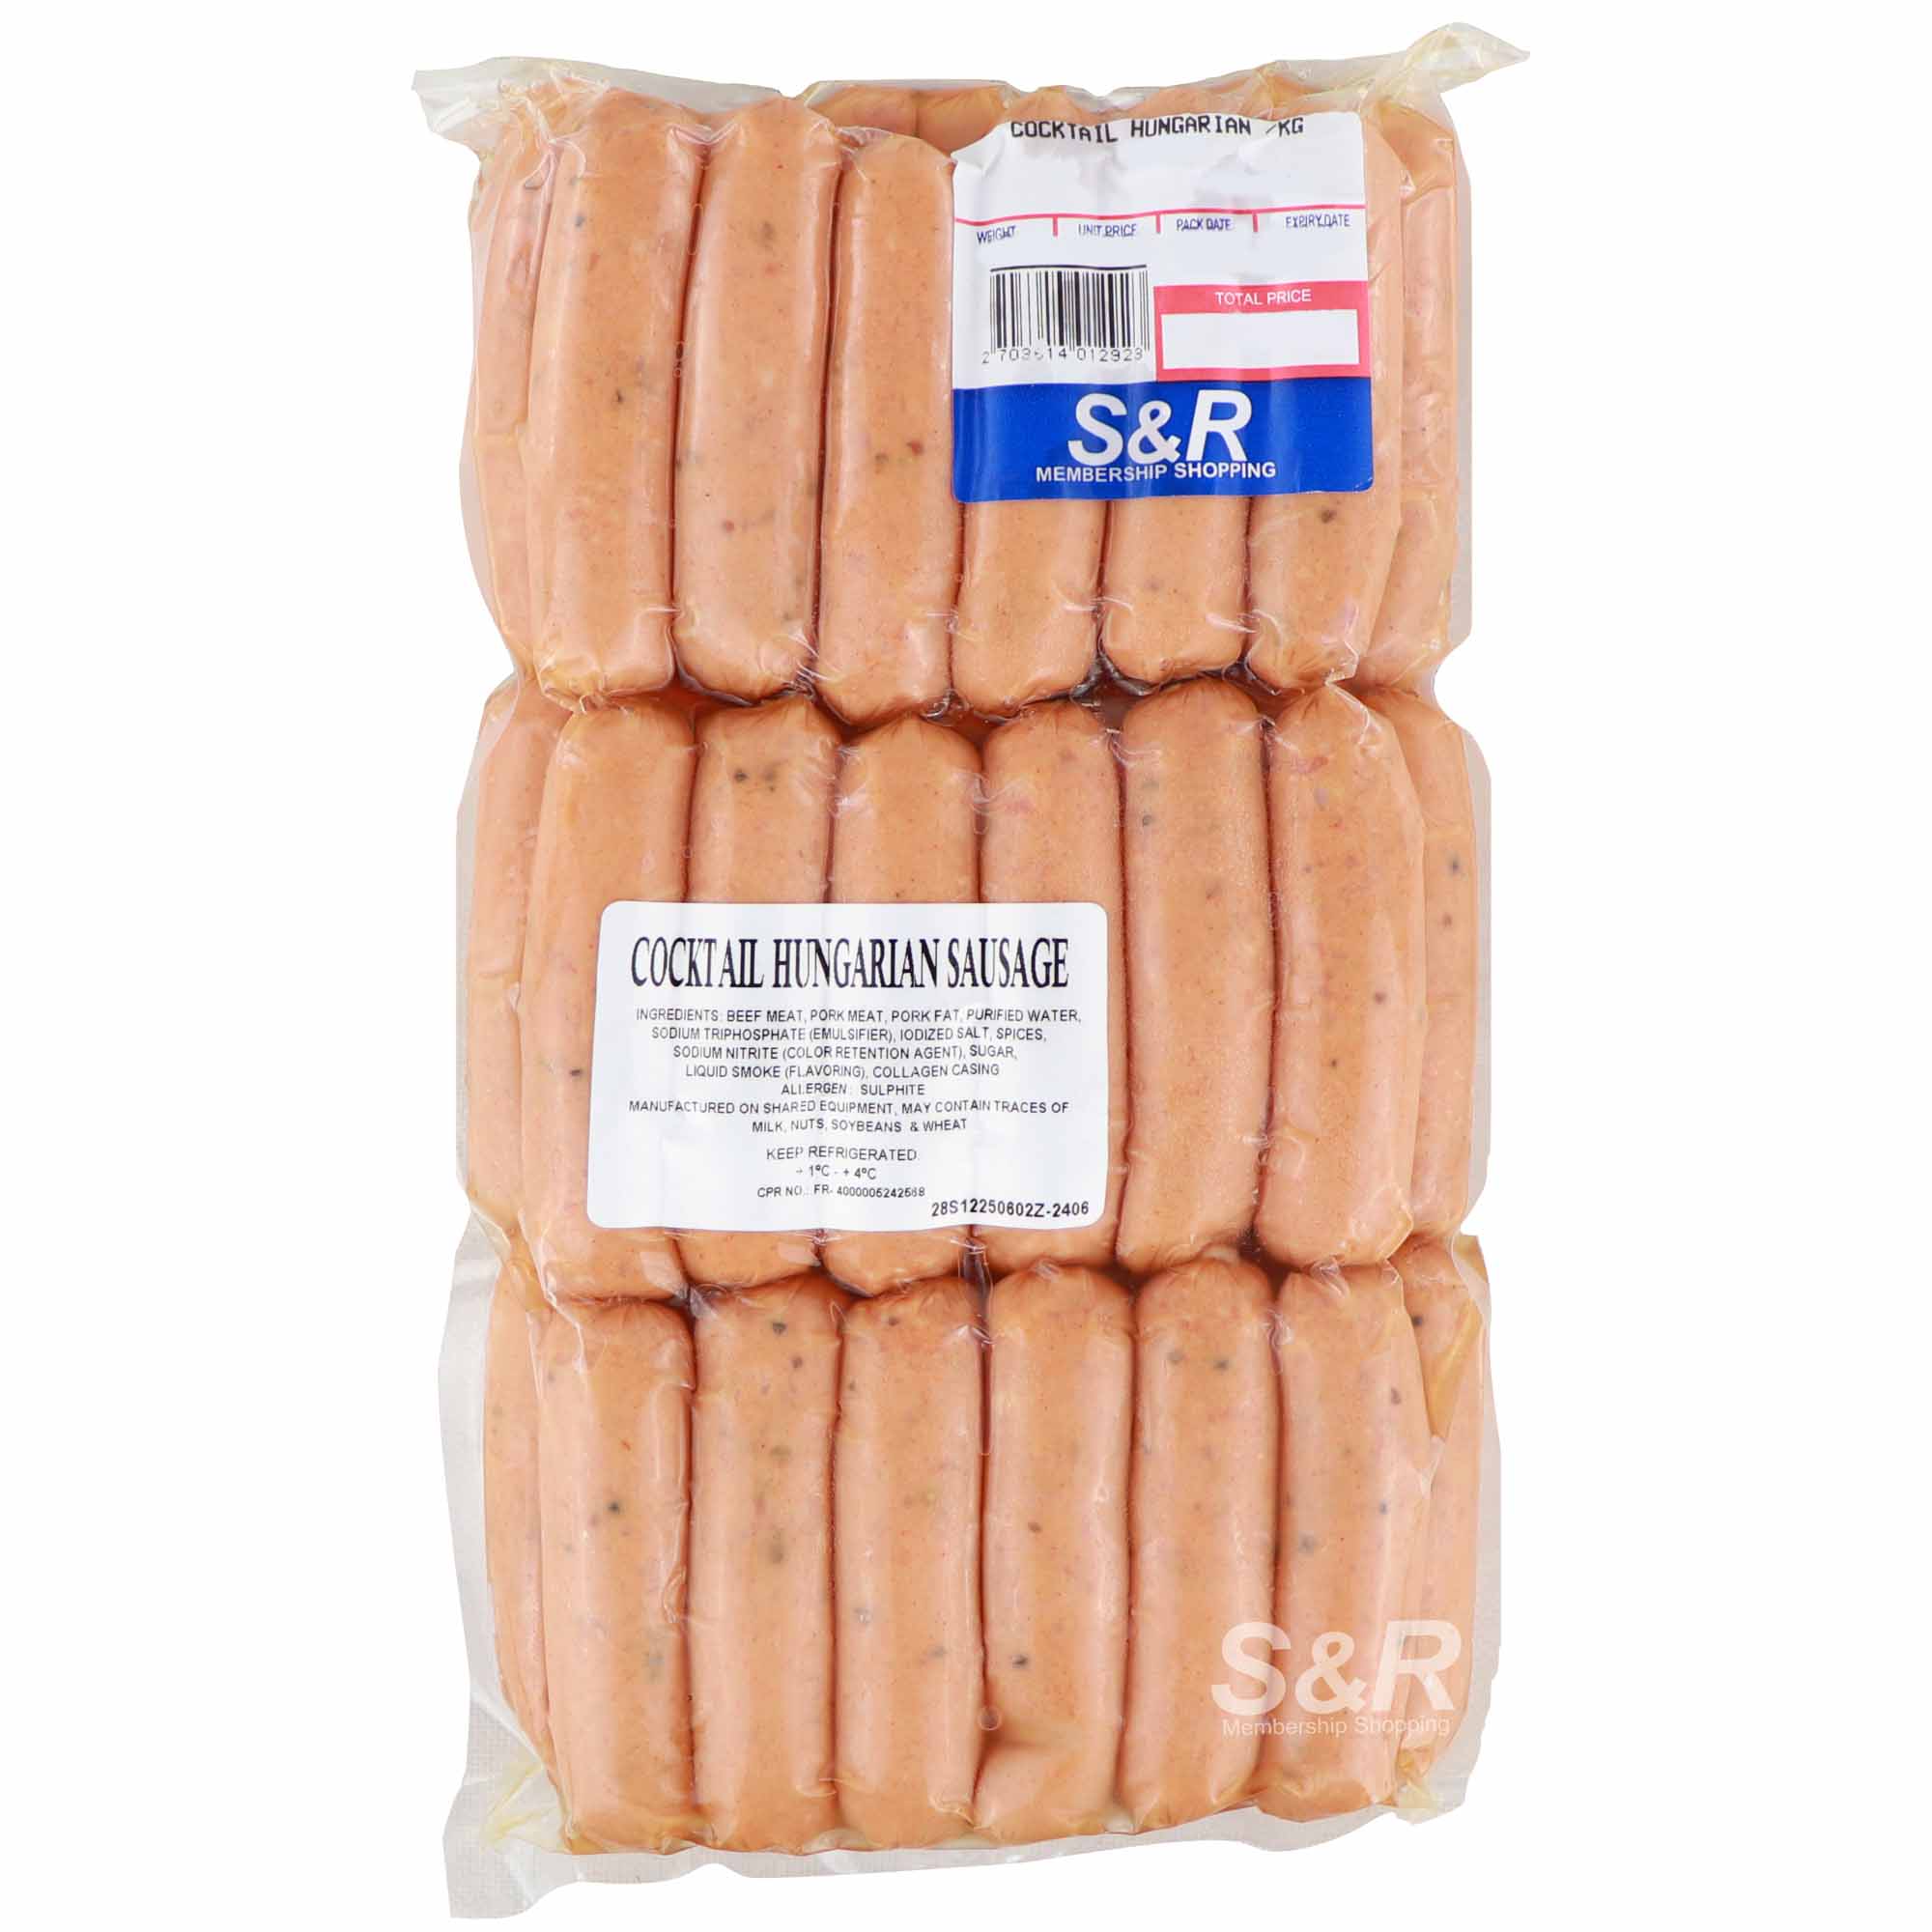 Member's Value Cocktail Hungarian Sausage approx. 1.2kg